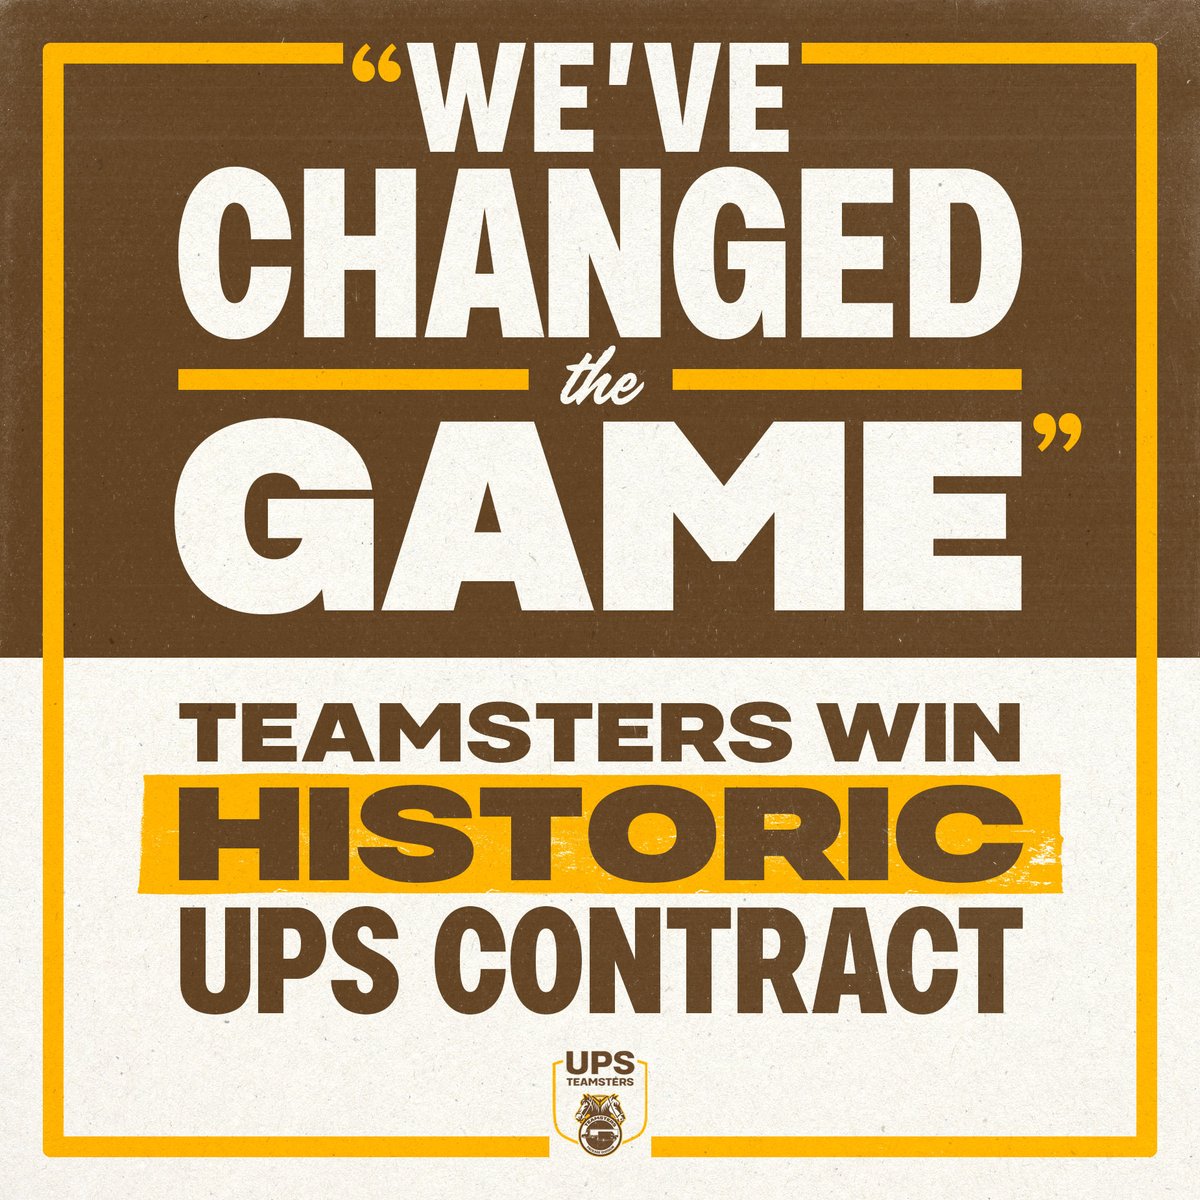 💥“WE’VE CHANGED THE GAME”: TEAMSTERS WIN HISTORIC UPS CONTRACT💥 Today, the #Teamsters reached the most historic tentative agreement for workers in the history of @UPS, protecting and rewarding more than 340,000 UPS Teamsters nationwide. #1u